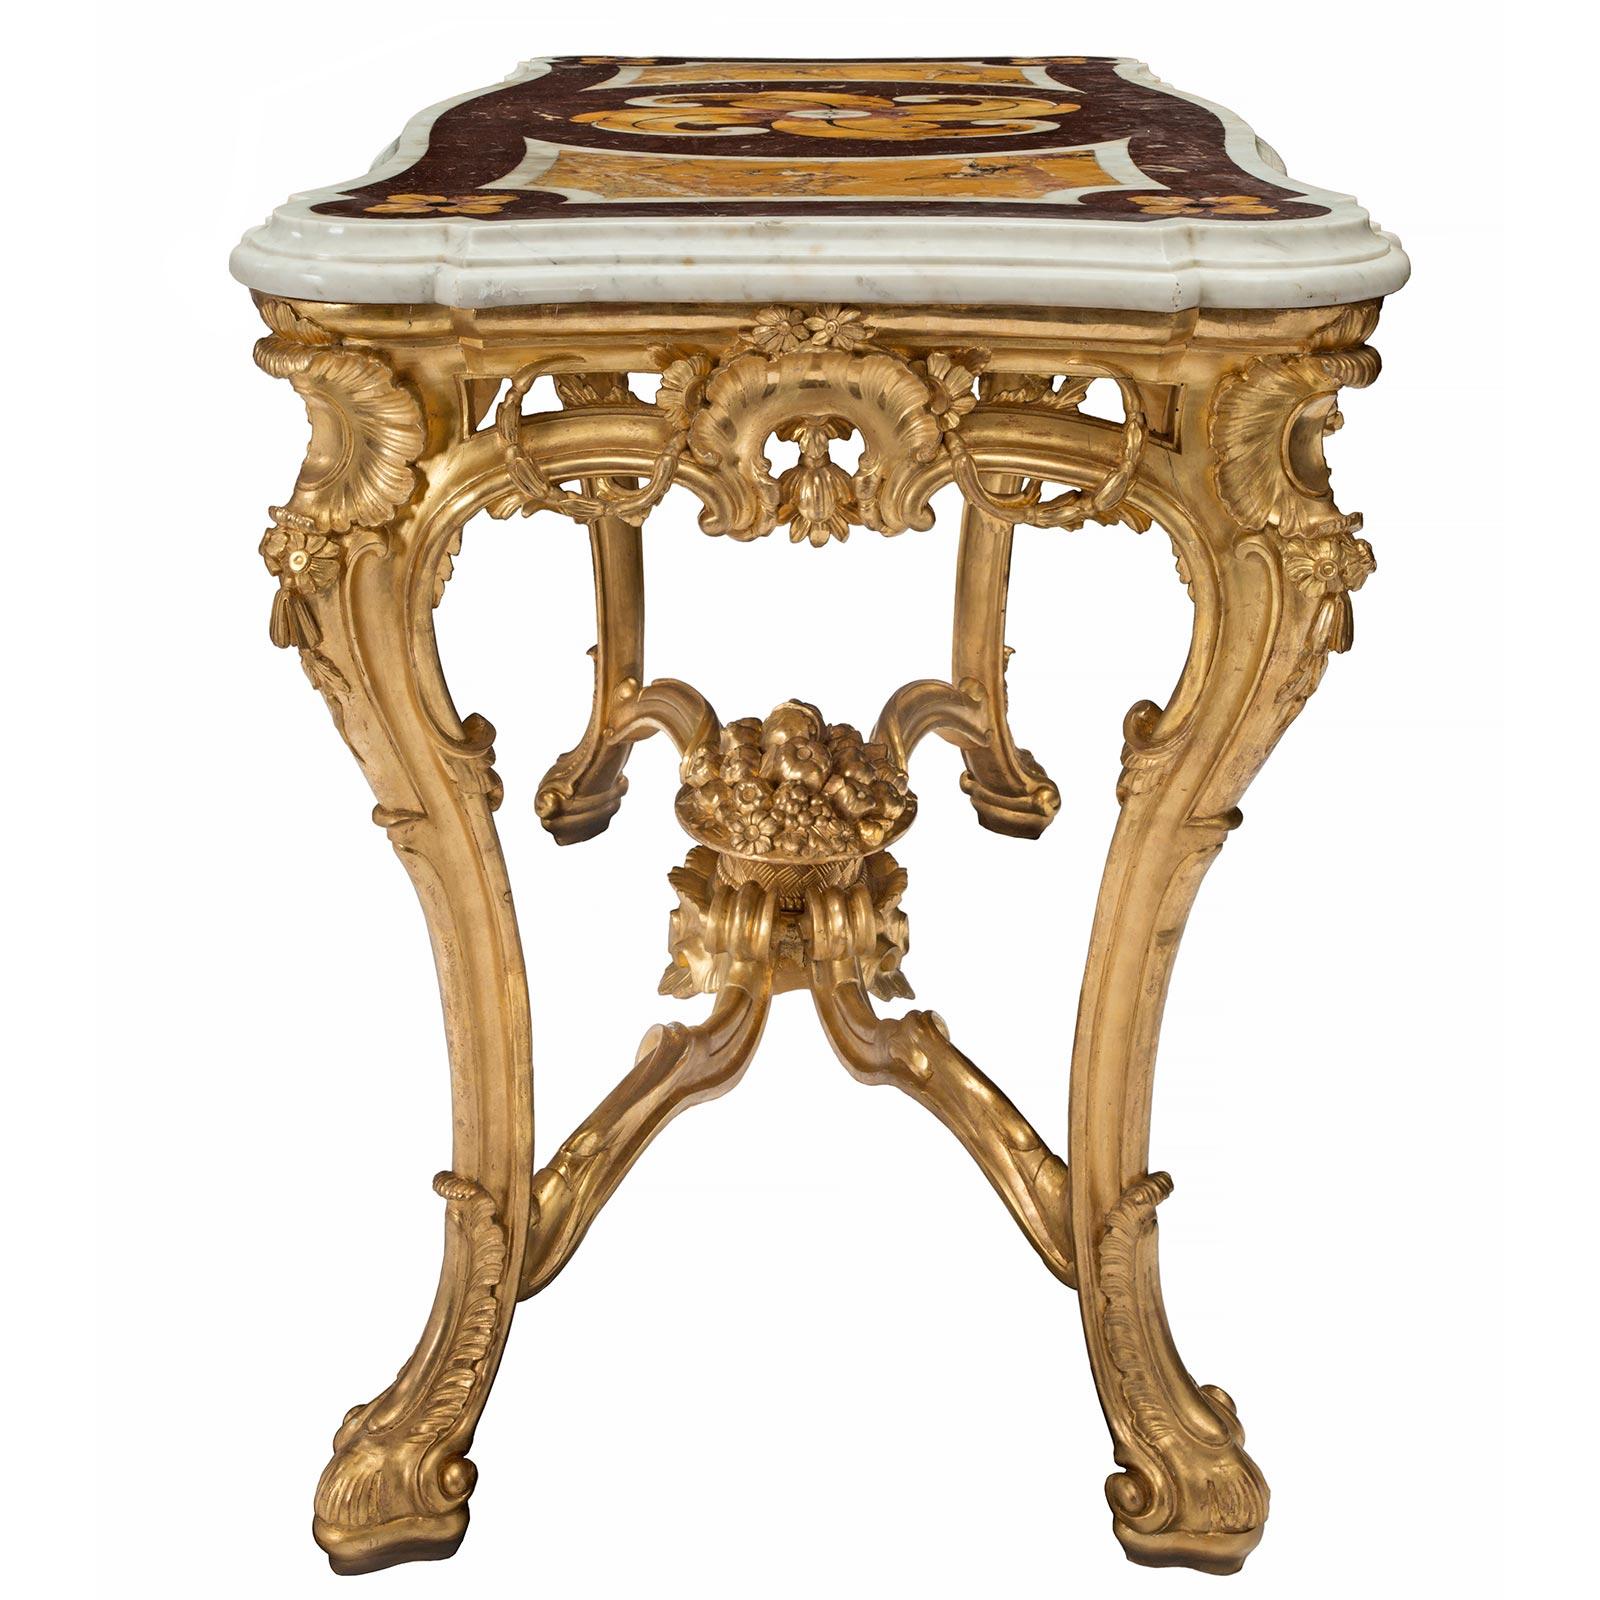 Italian Early 19th Century Louis XV Style Giltwood and Marble Center Table For Sale 3